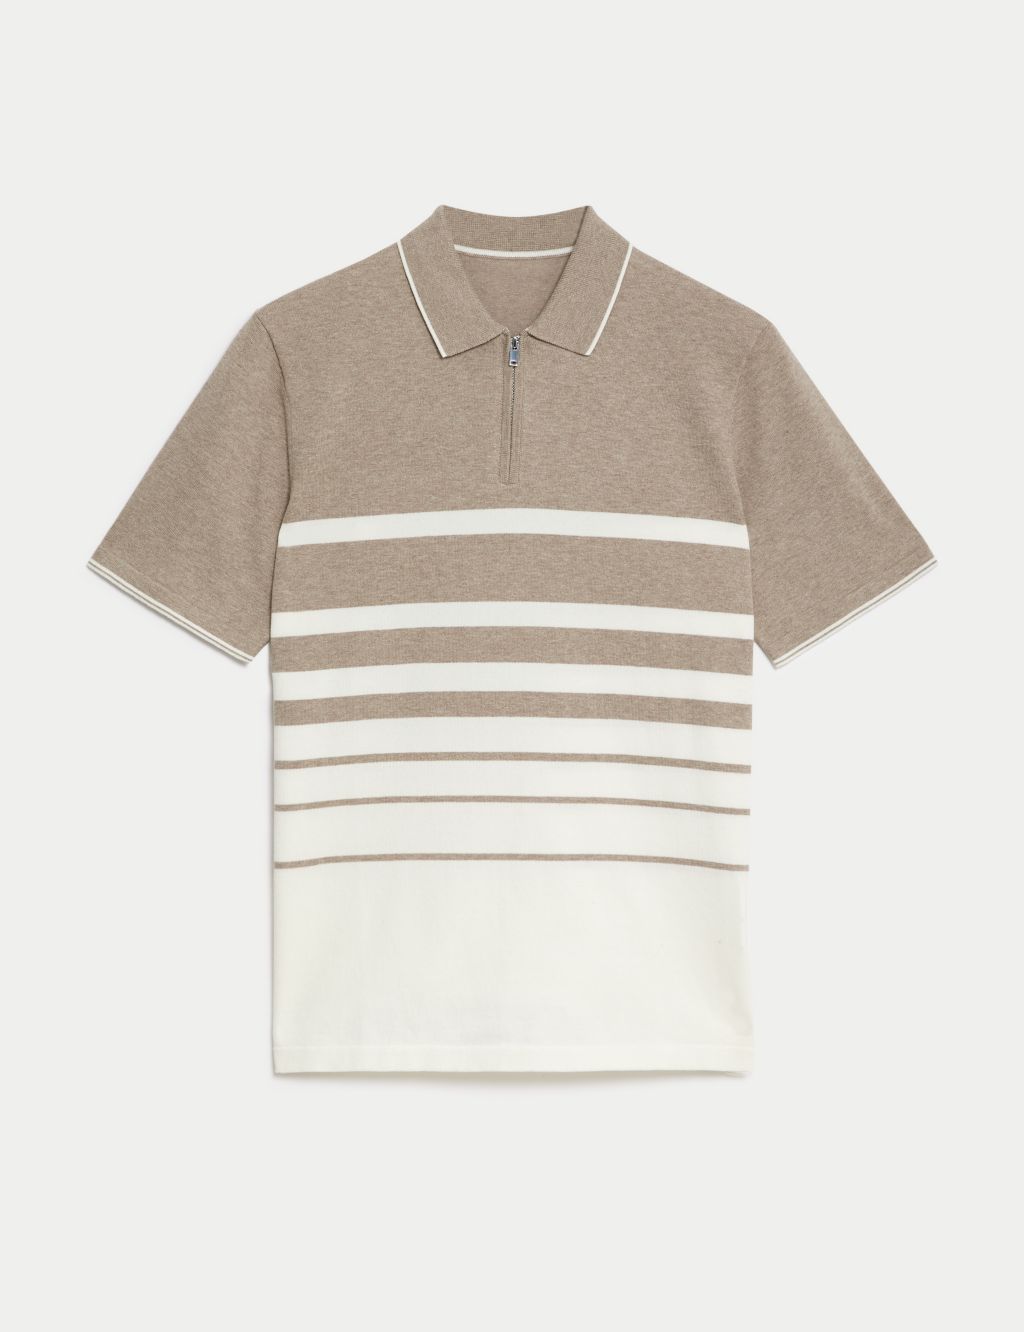 Cotton Rich Striped Knitted Polo Shirt image 2